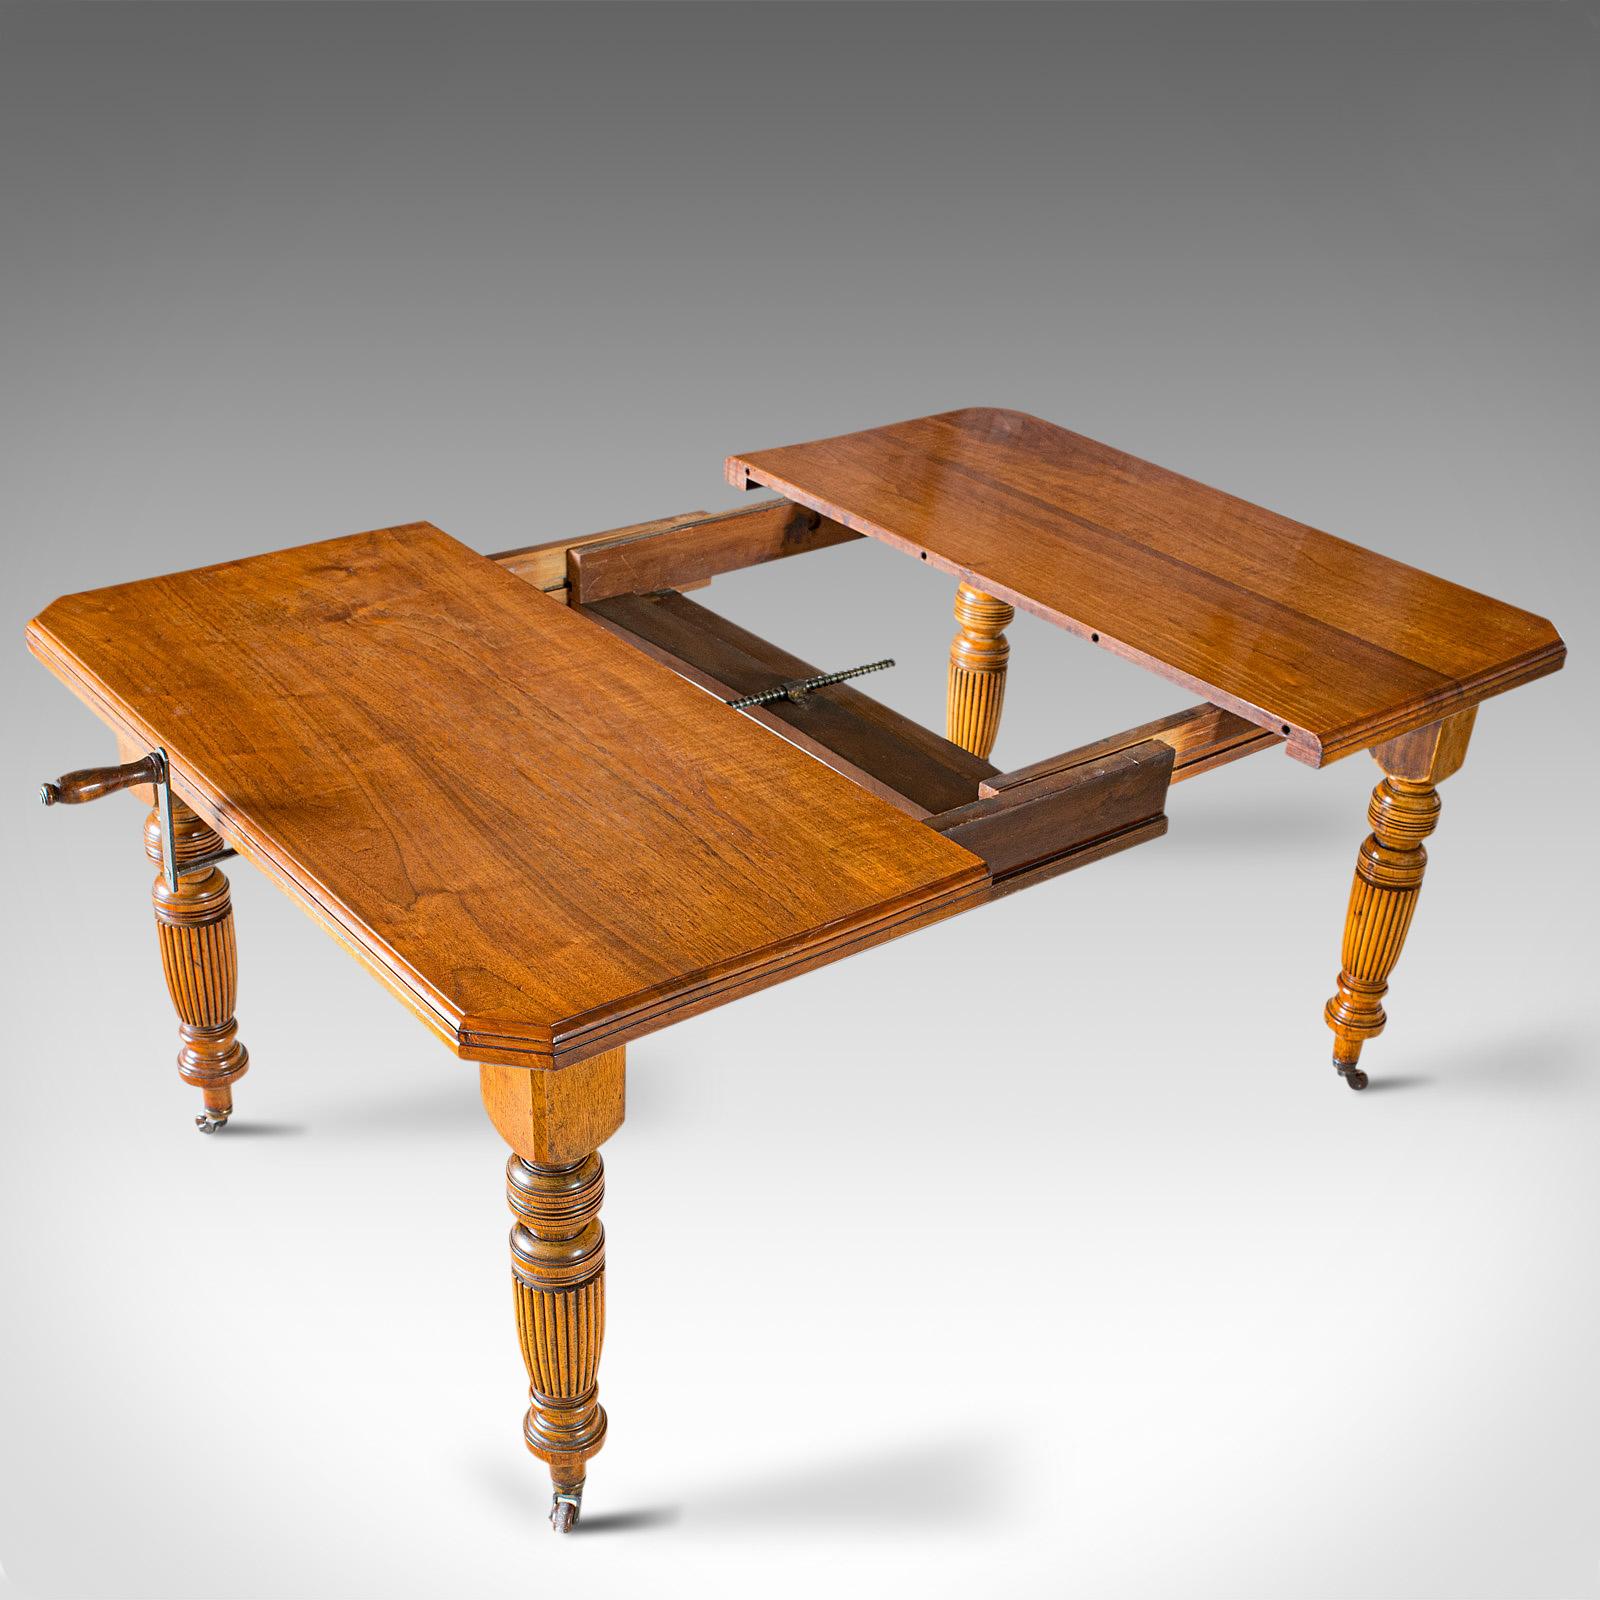 Antique Extending Dining Table, English, Walnut, Seats 4-6, Victorian, 1890 2